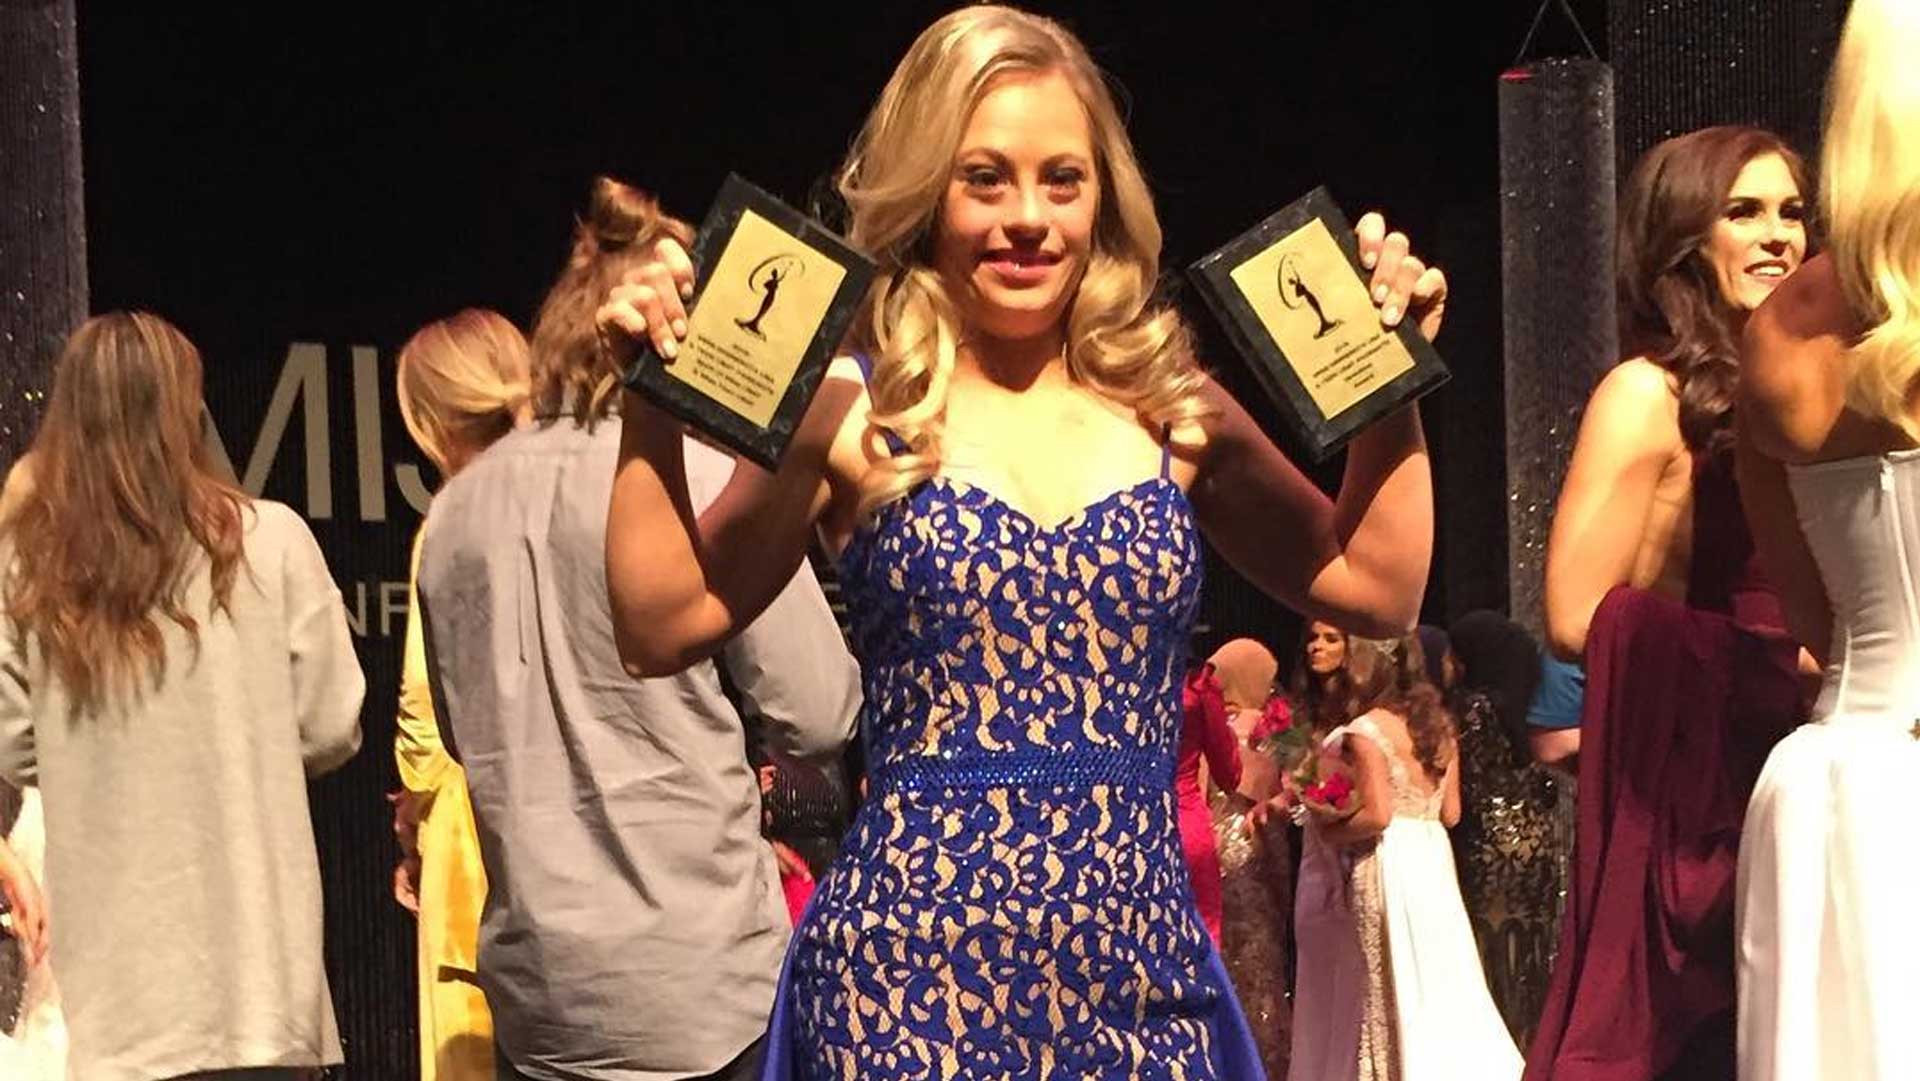 Meet Miss USA’s first beauty contestant with Down syndrome